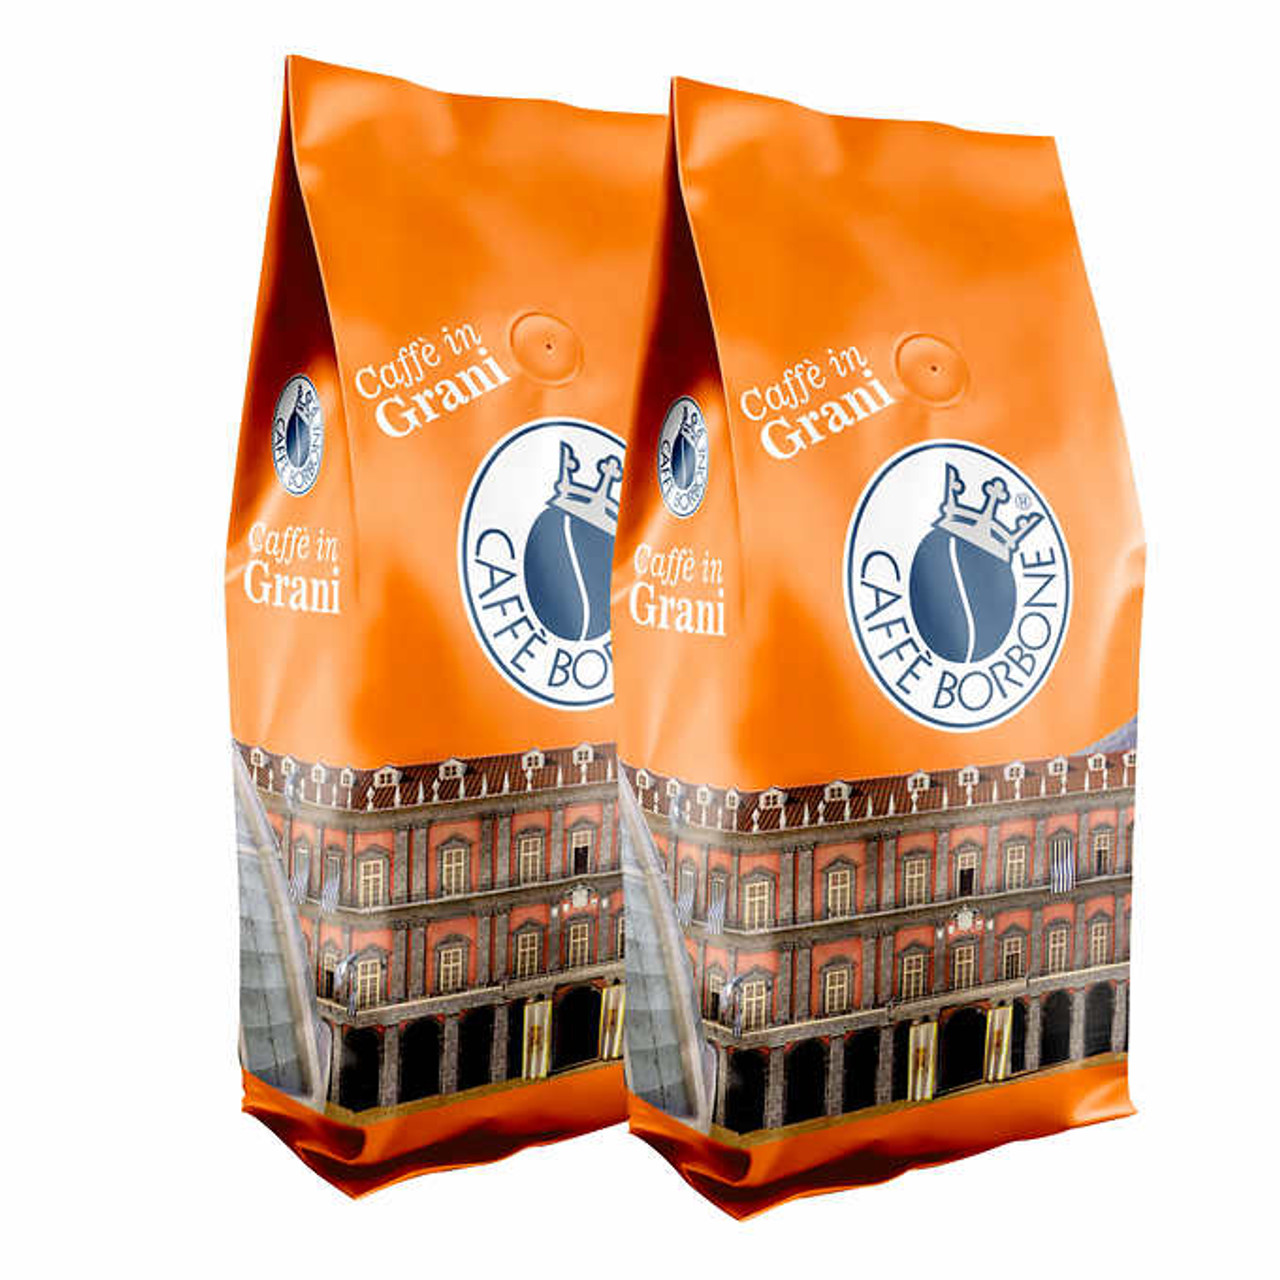 Caffe Borbone Palazzo Nobile Whole Coffee Beans - 2 x 1 kg - Exquisite  Italian Coffee Elegance